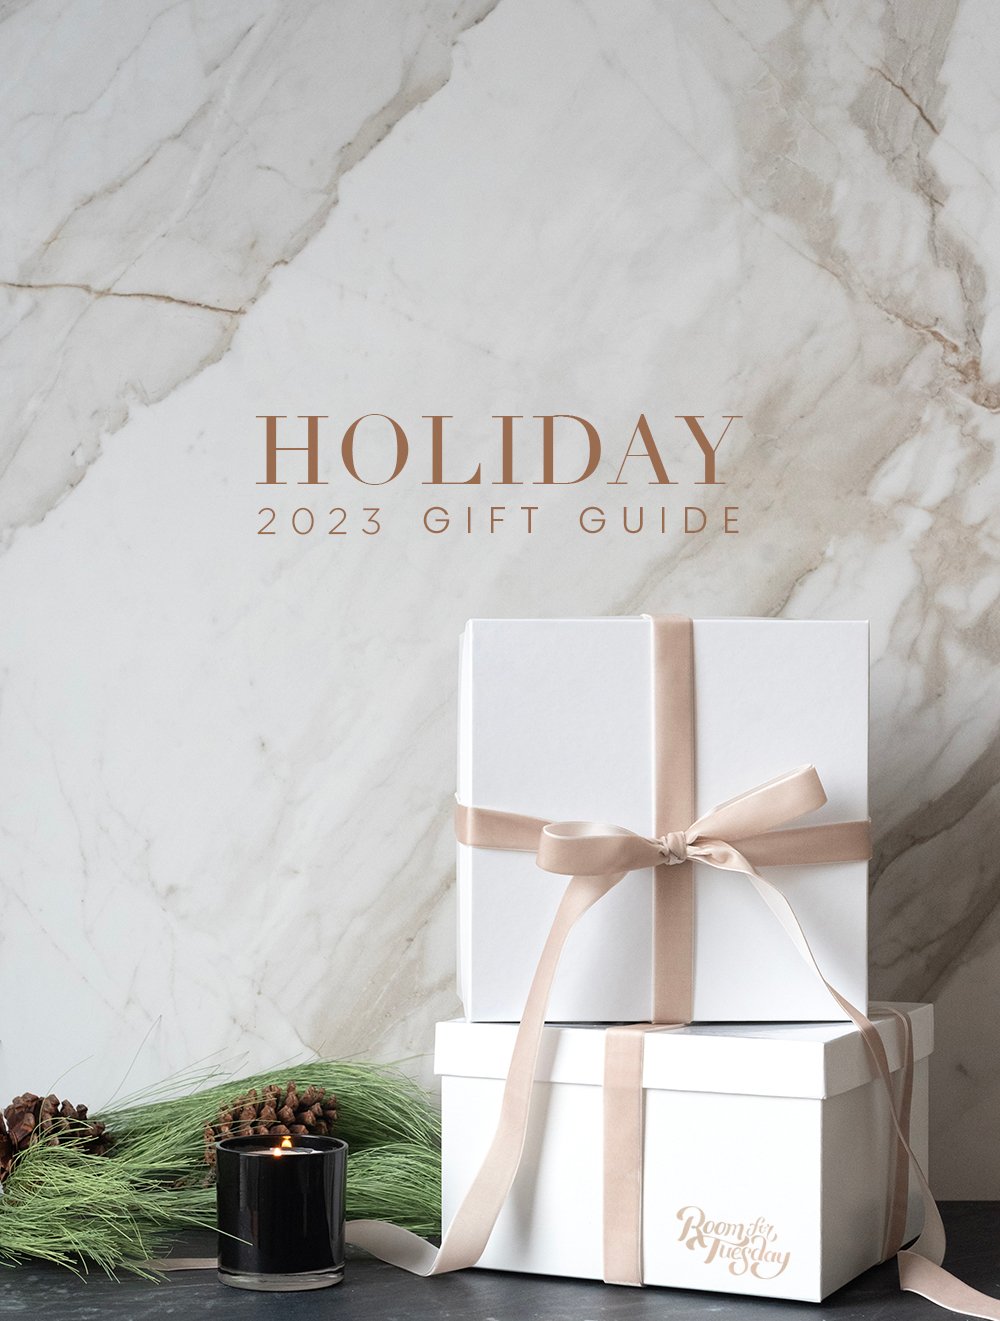 2023 Holiday Gift Guide - roomfortuesday.com